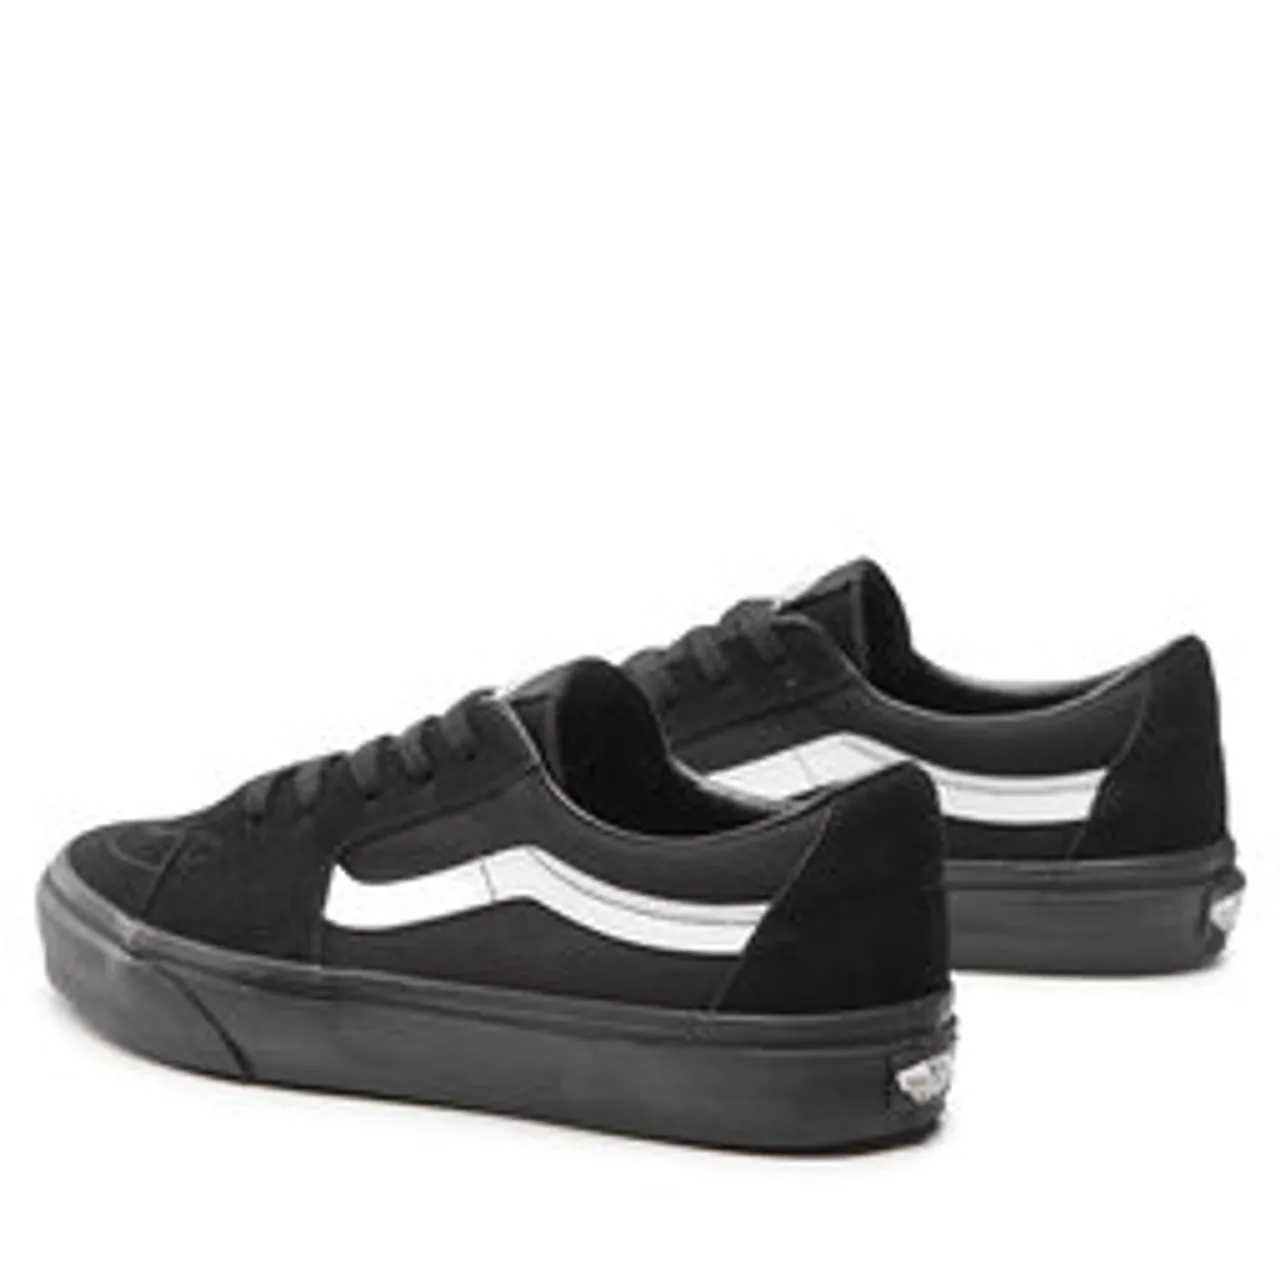 Sneakers aus Stoff Vans Sk8-Low VN0A5KXDBZW1 Contrast Black/White